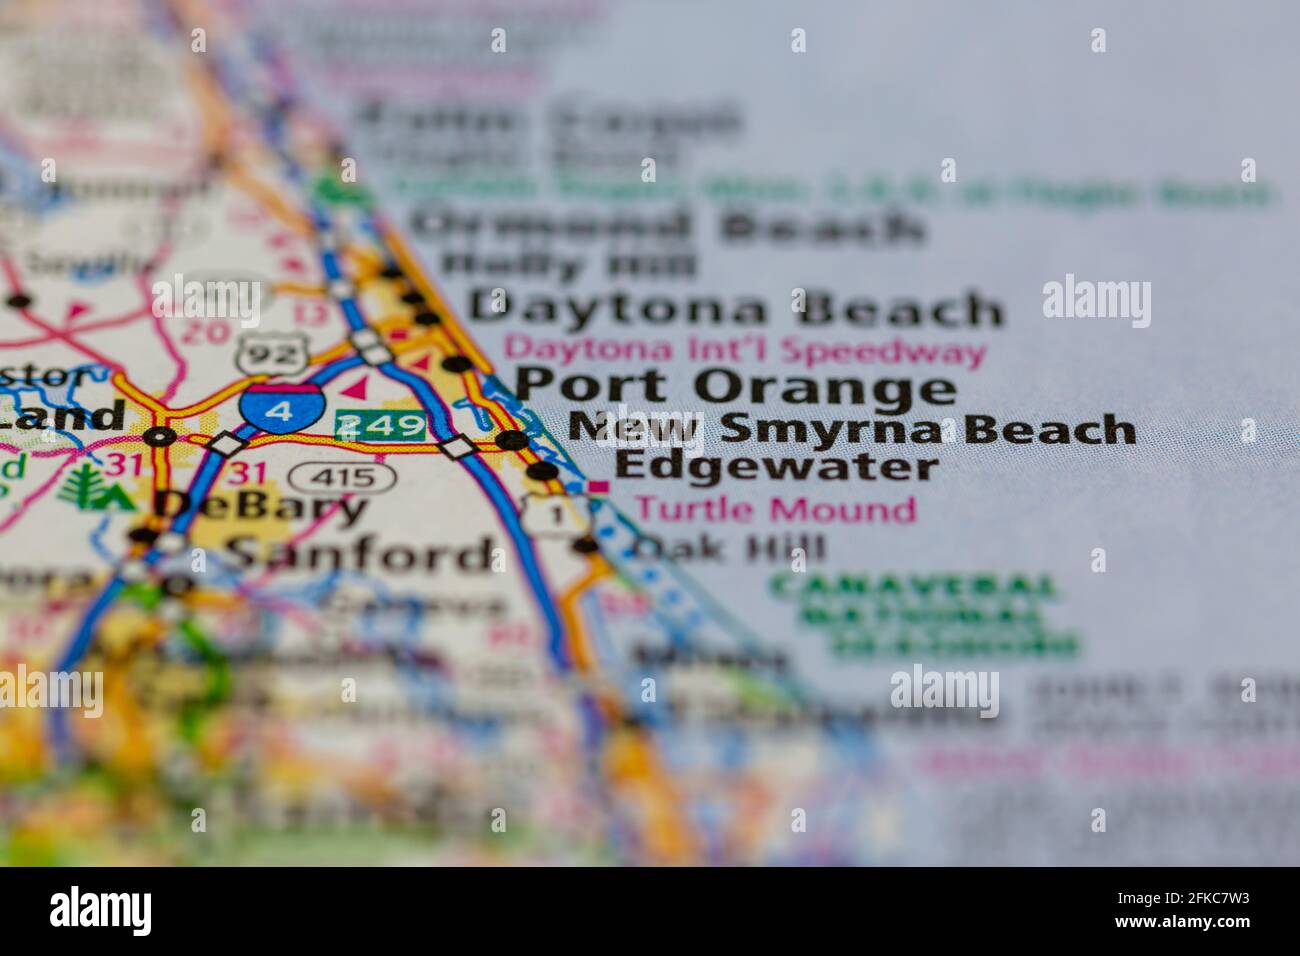 New Smyrna Beach Florida Usa Shown On A Geography Map Or Road Map Stock Photo Alamy